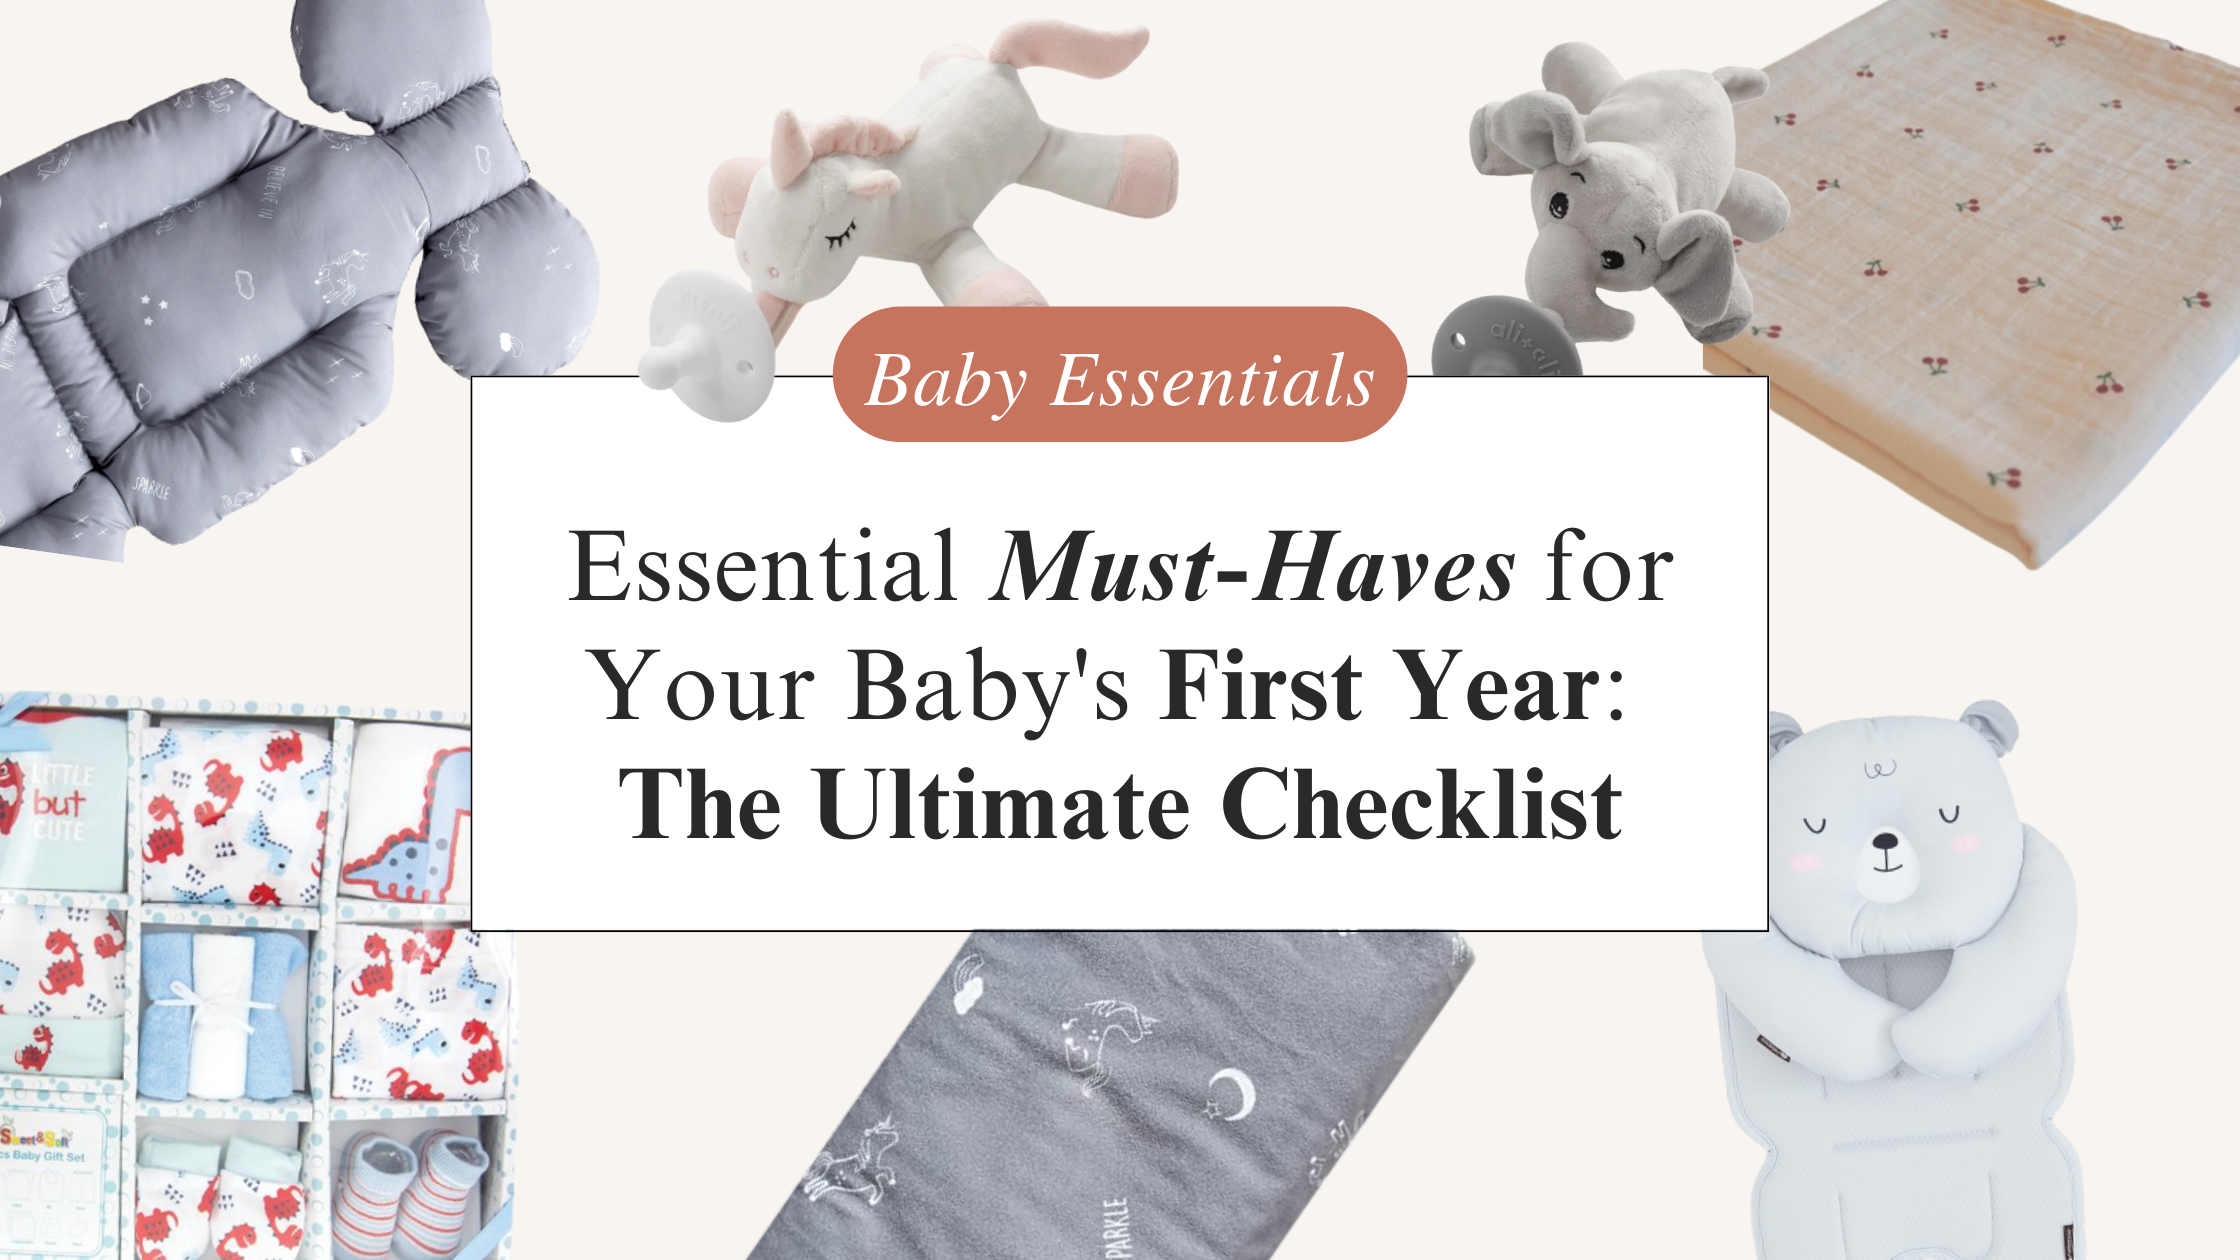 Top Essentials for Your Baby's First Year